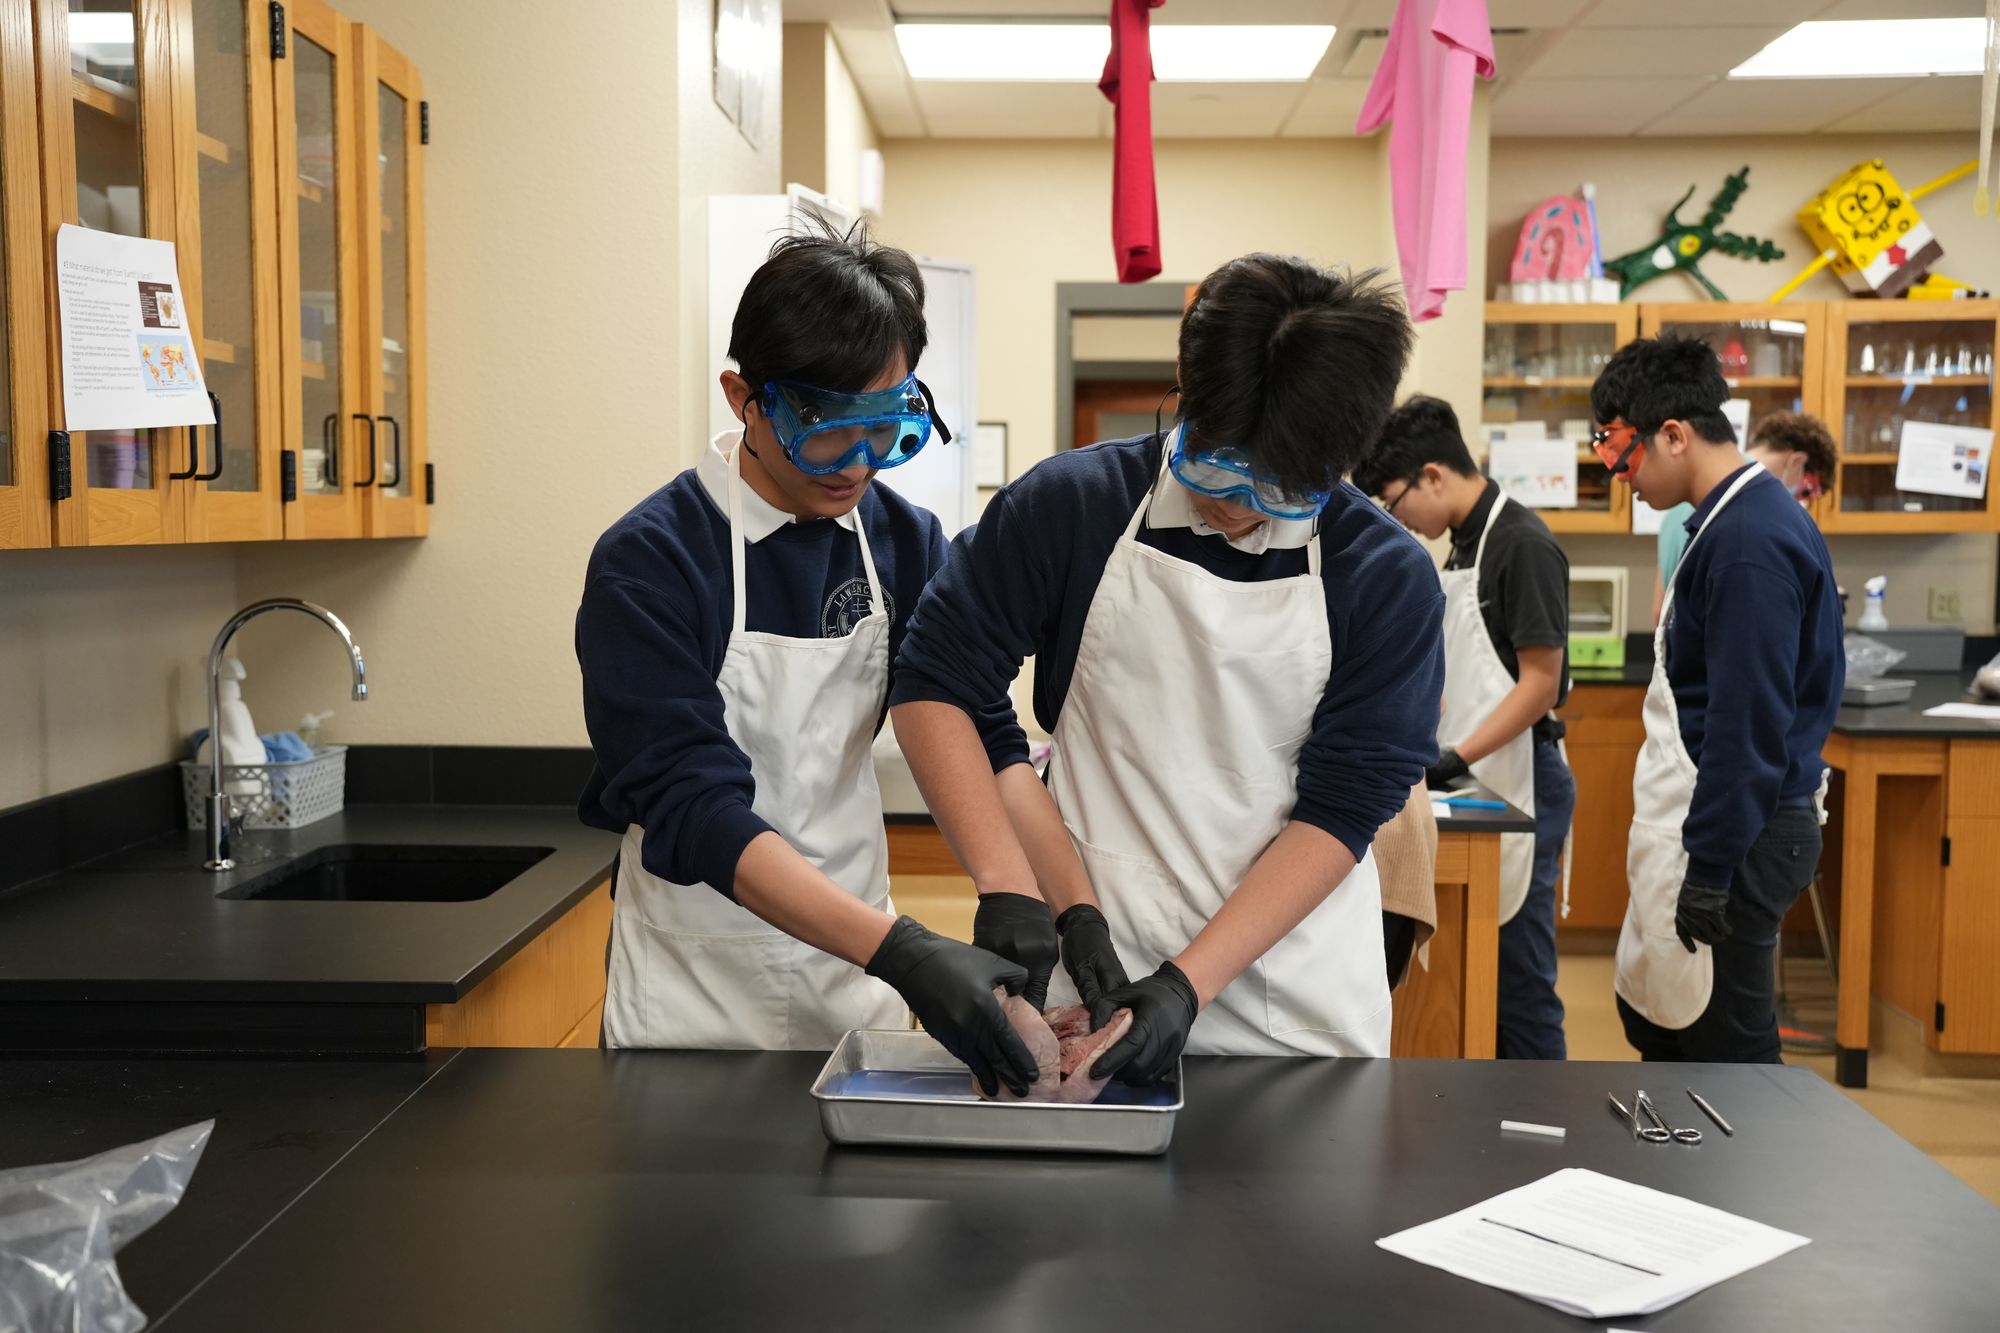 Two students work on a science project in the lab